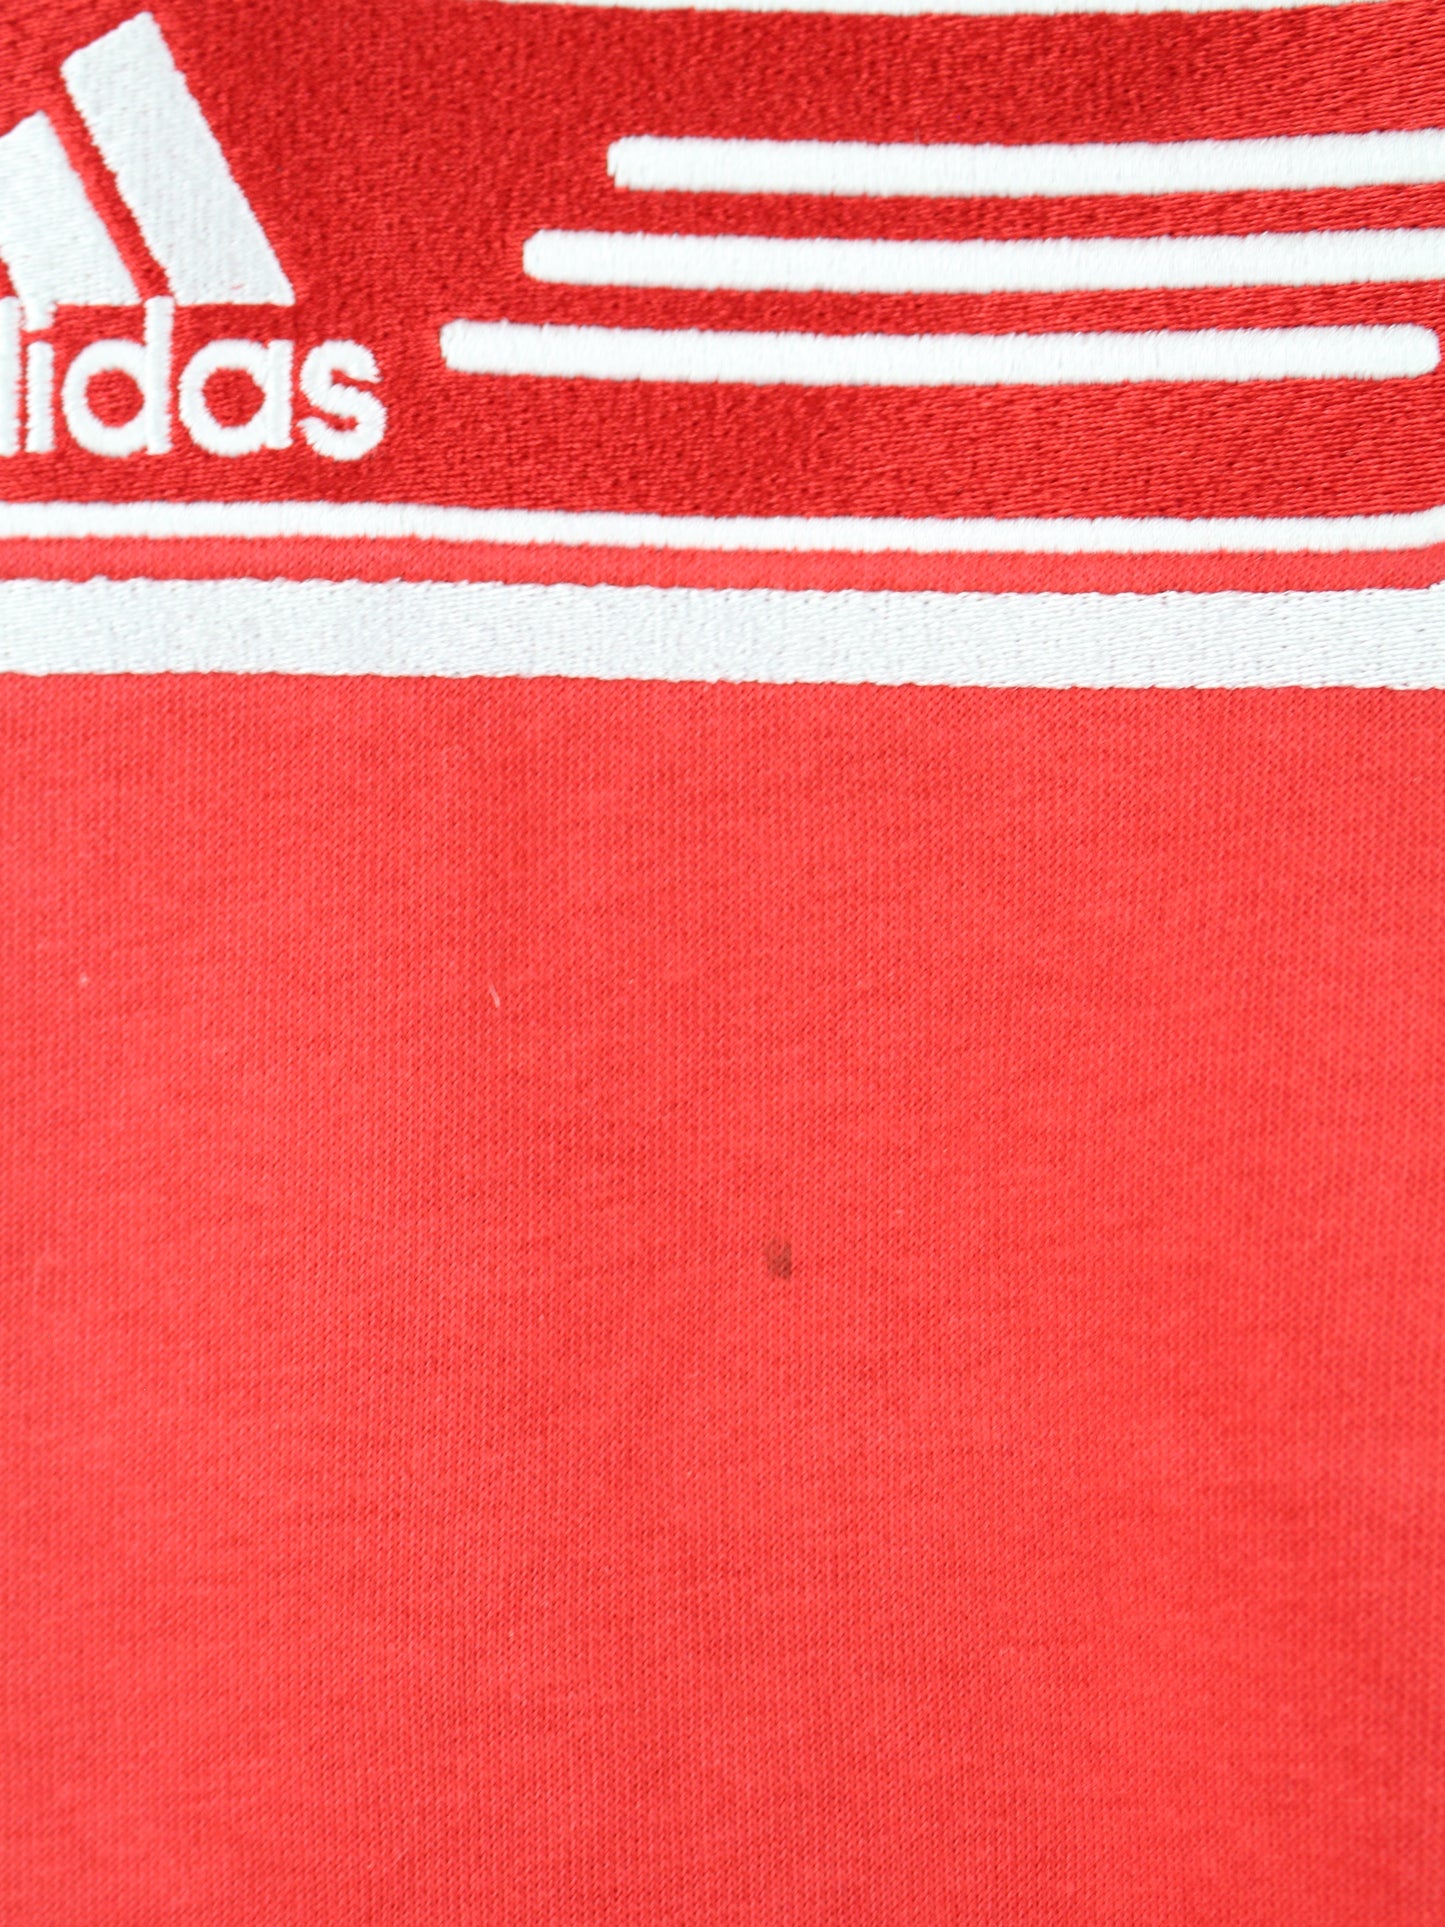 Adidas Embroidered Sweater Rot XL